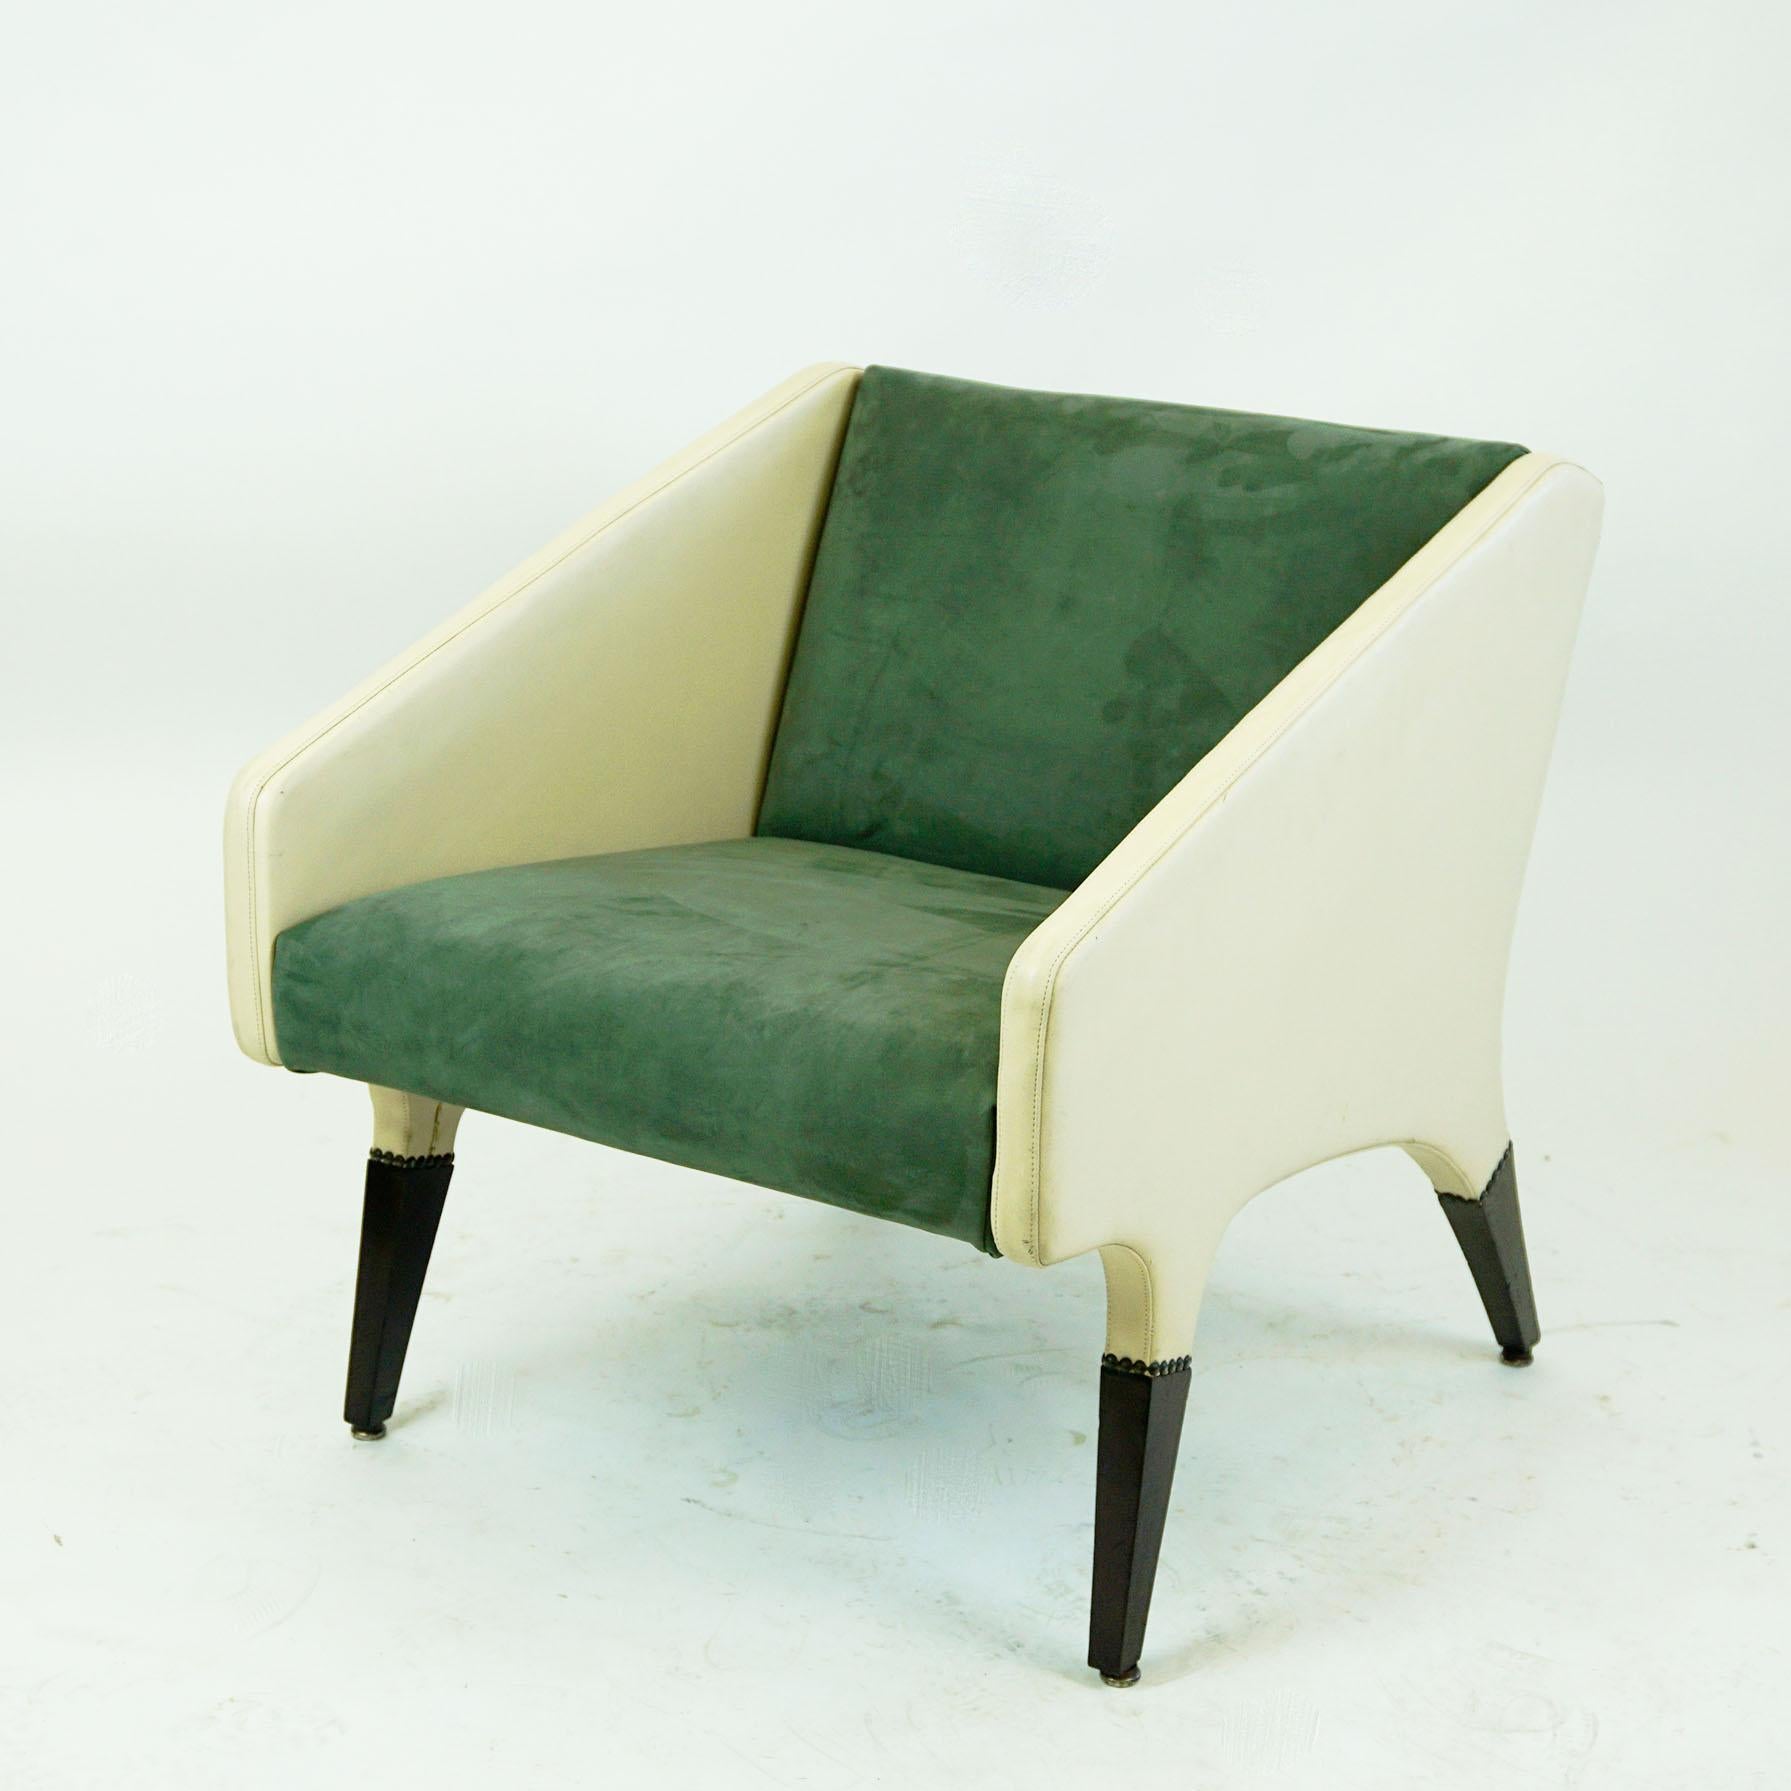 Italian Midcentury Parco dei Principi Lounge Chair by Gio Ponti for Cassina 6